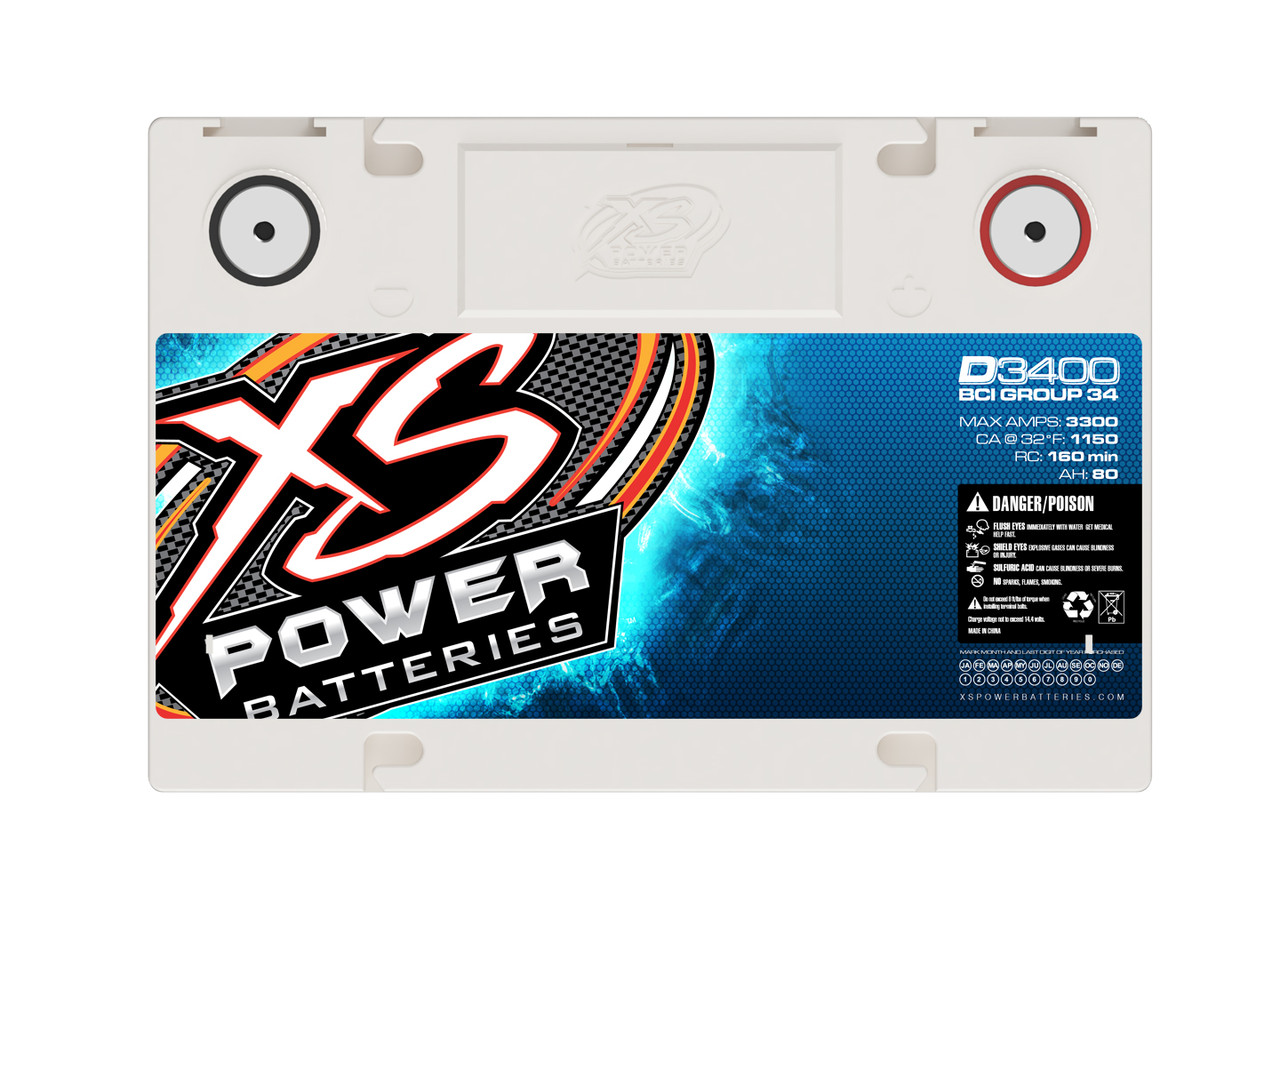 XS Power D3400 12V BCI Group 34 AGM Battery, Max Amps 3,300A, CA: 1150 Ah: 80